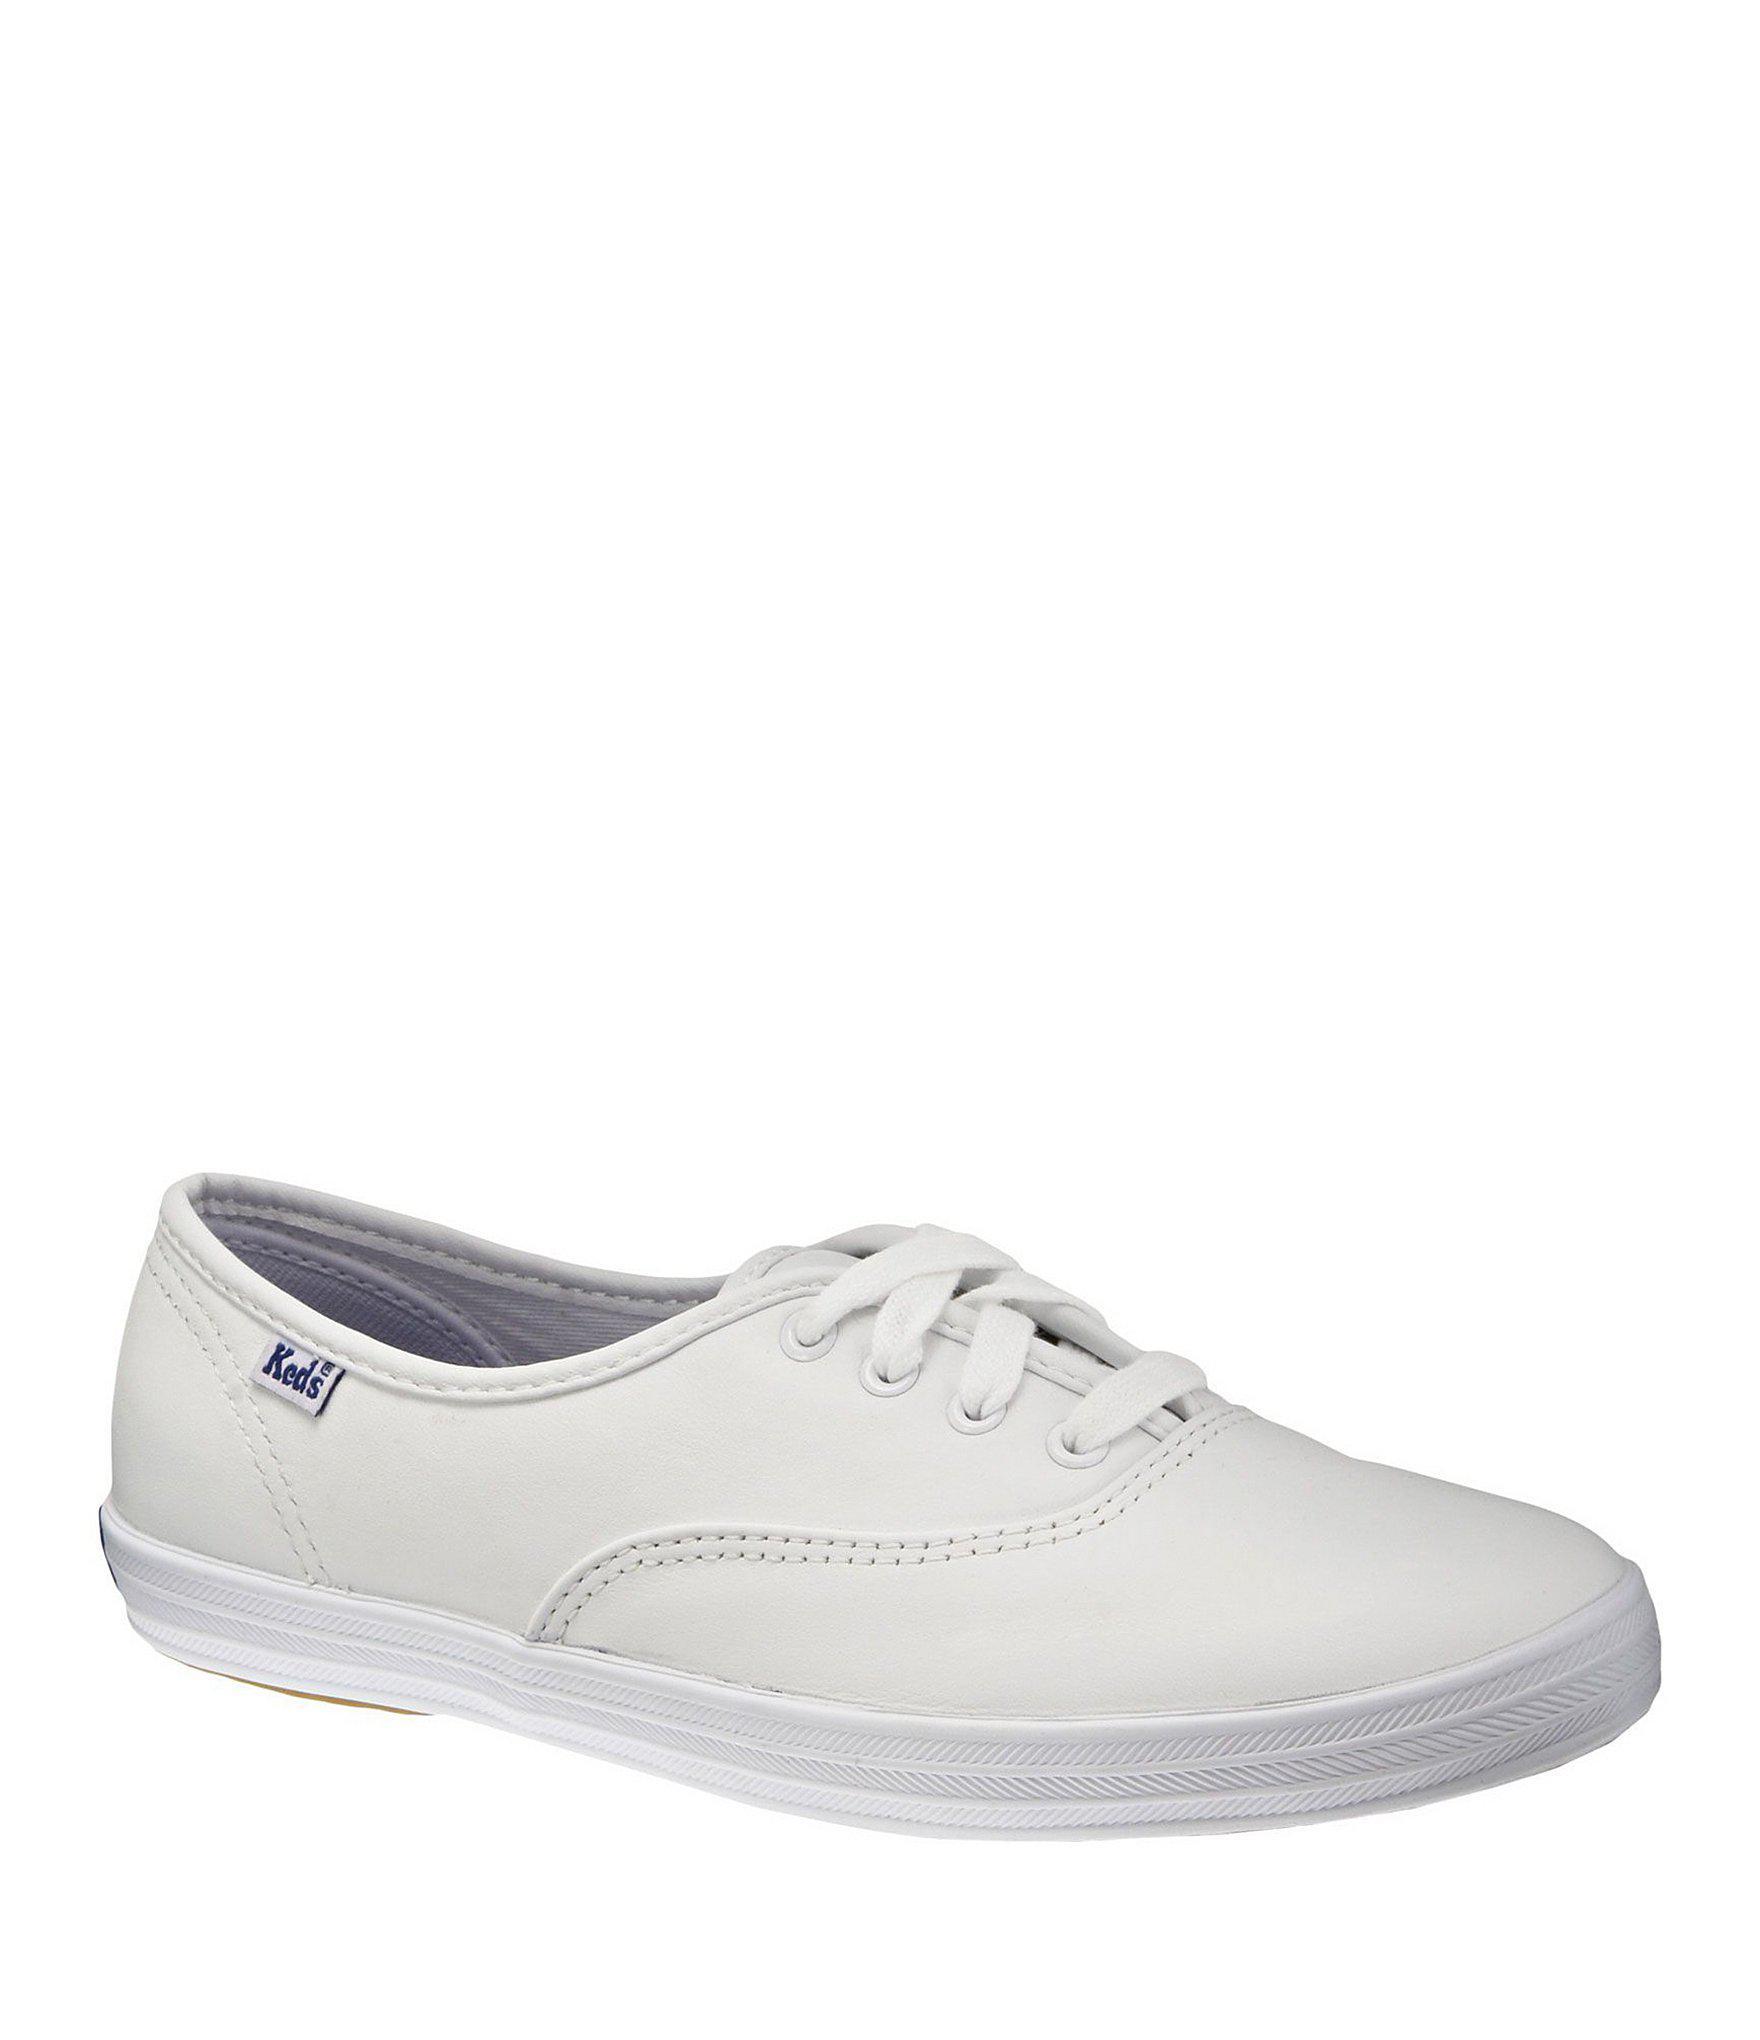 Keds Champion Leather Sneakers in White - Lyst